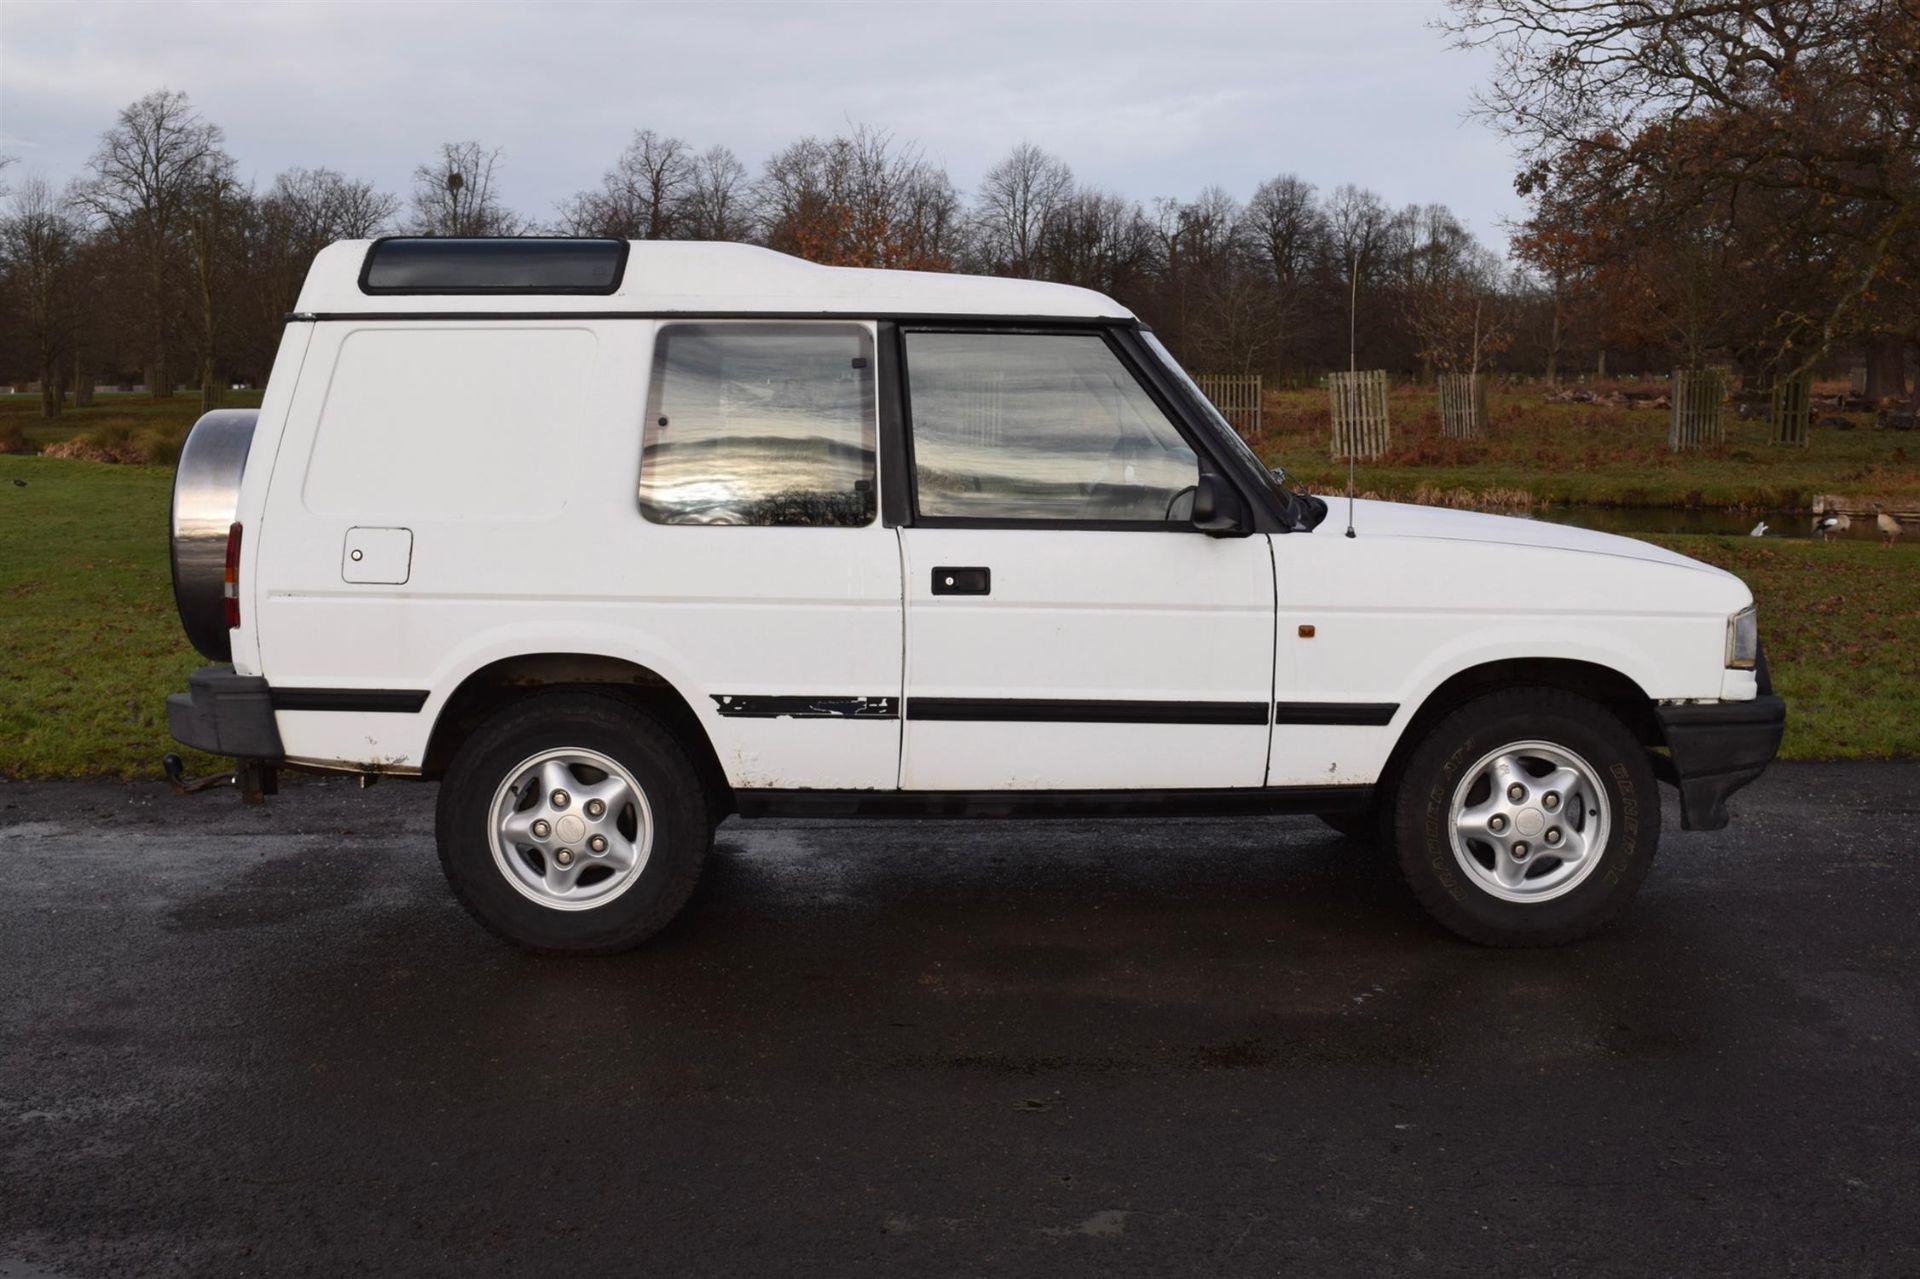 1998 Land Rover Discovery 2-Door R41 KAA. 2-door Land Rover Discovery 300 TDI, which was first - Image 28 of 41